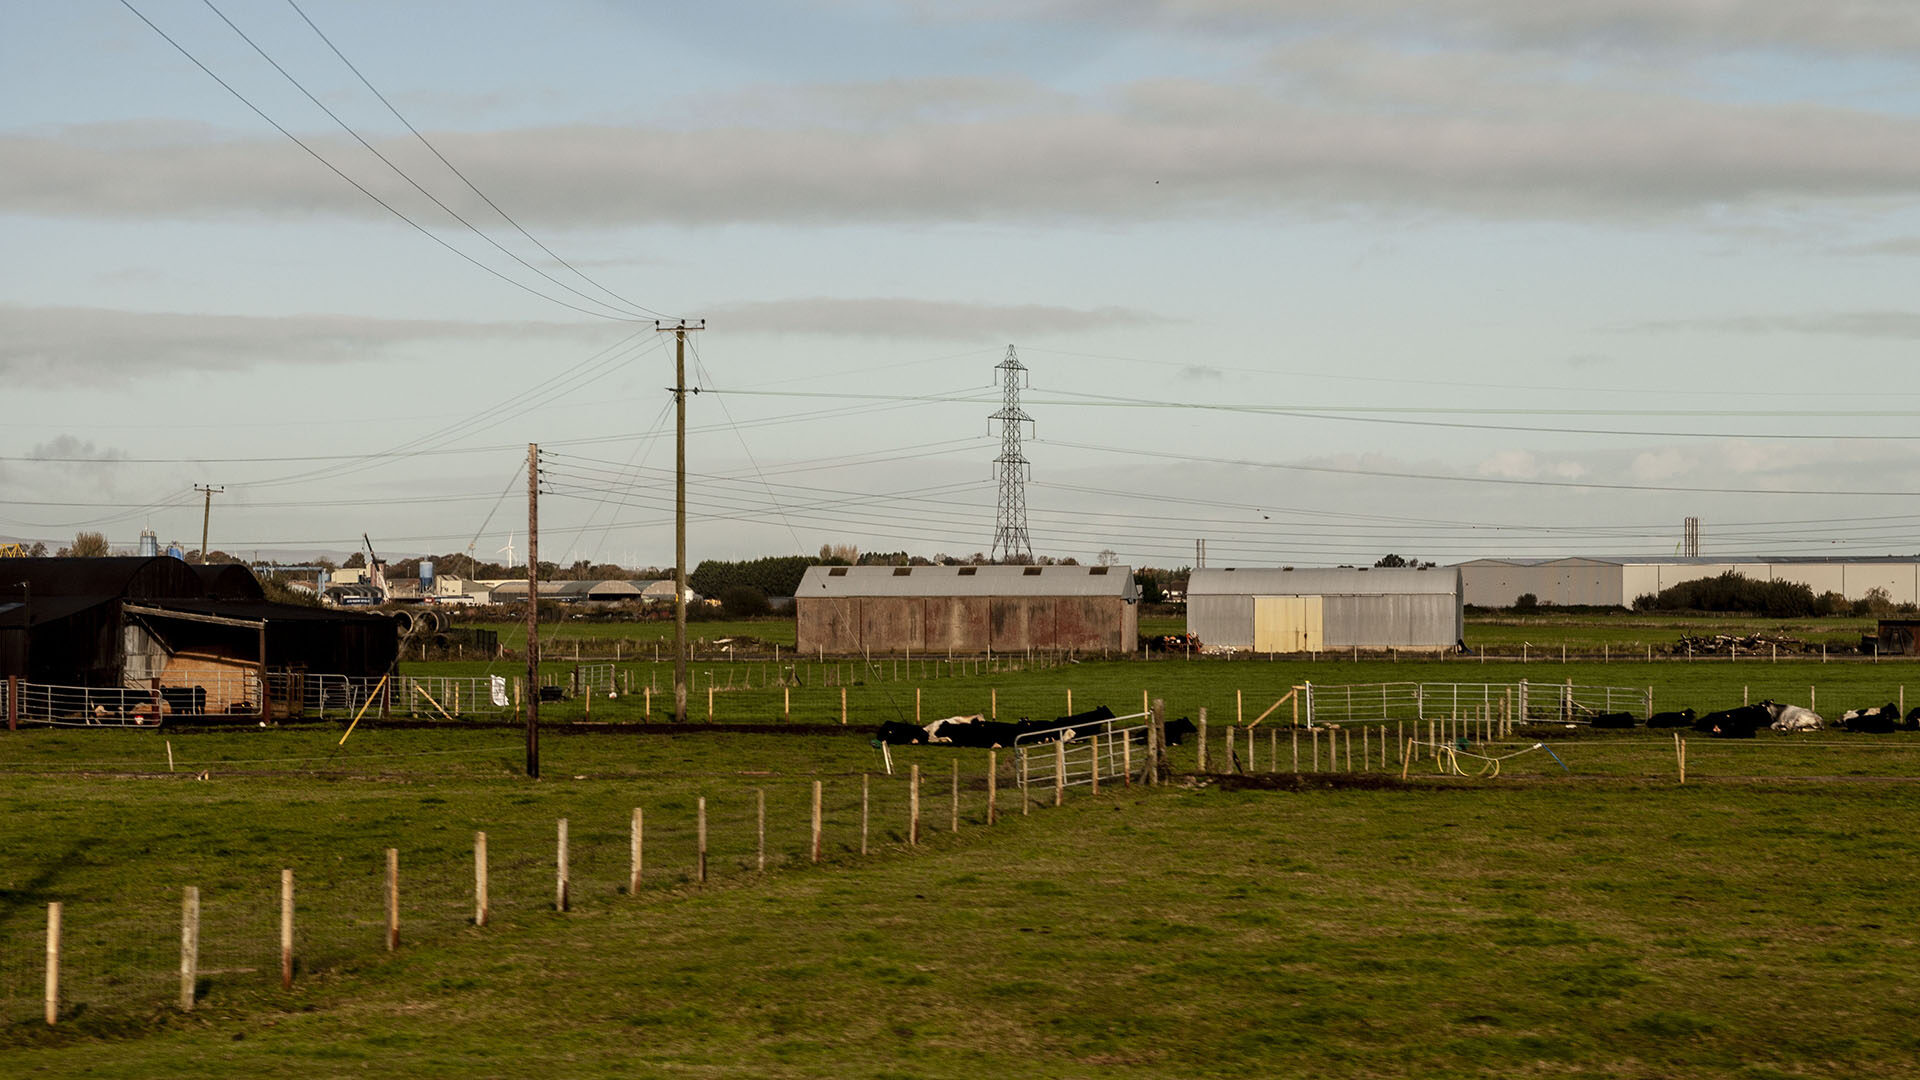 Agricultural and industrial buildings dominate the landscape at the site of the former Toome Airfield, Co. Antrim.